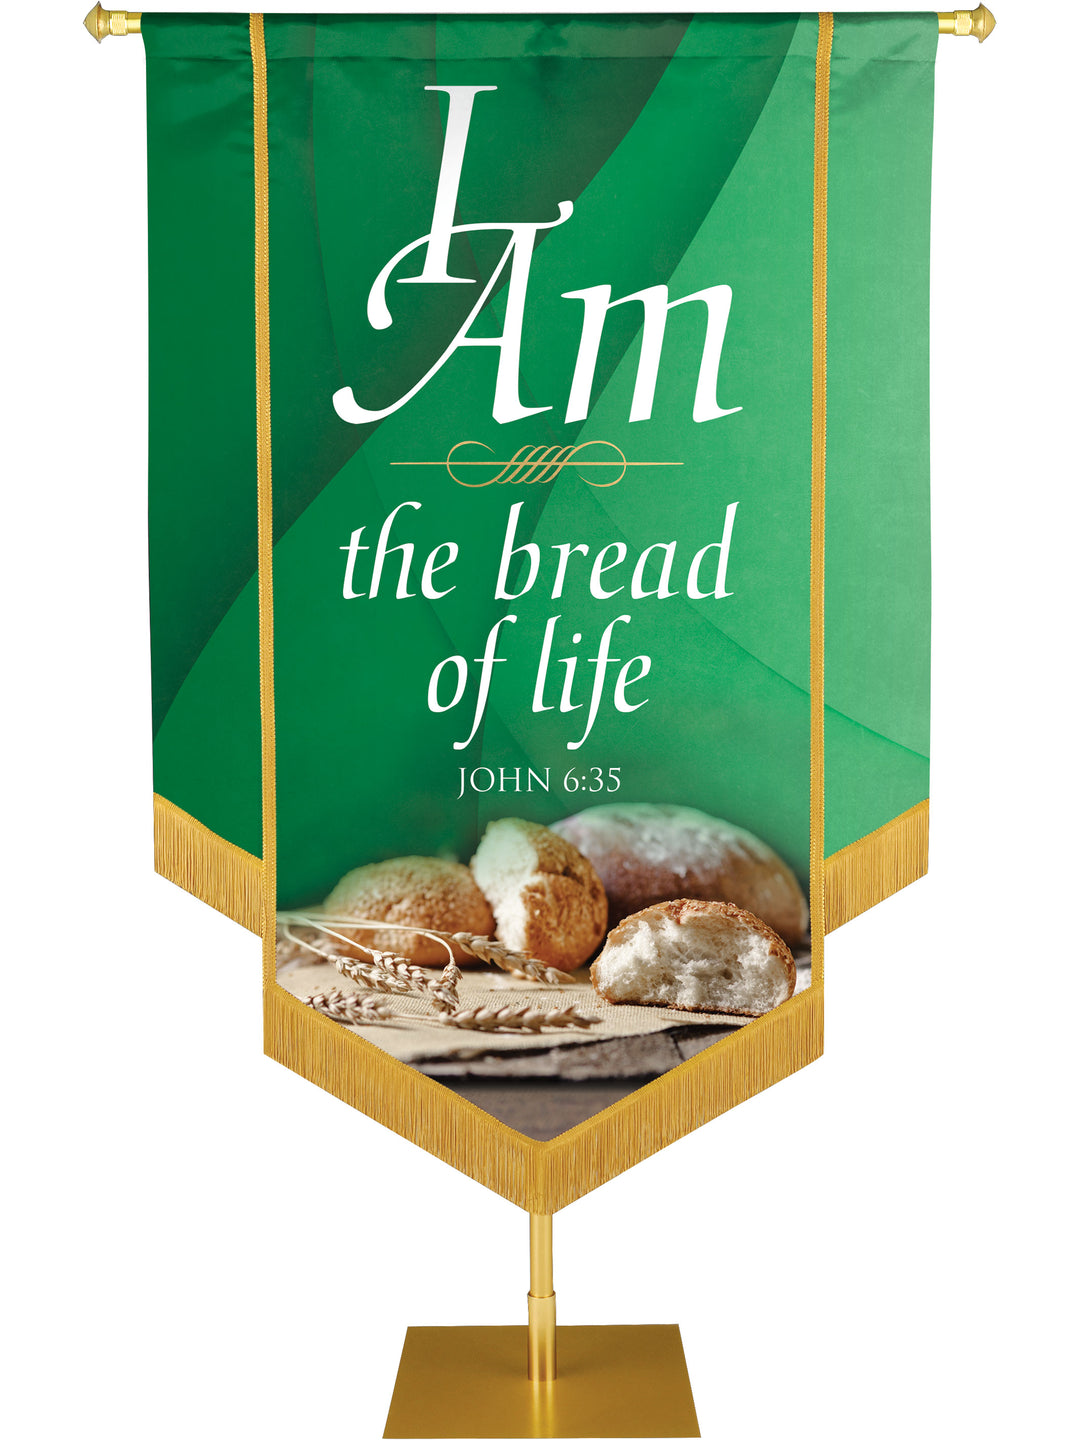 I Am Bread of Life Embellished Banner - Handcrafted Banners - PraiseBanners